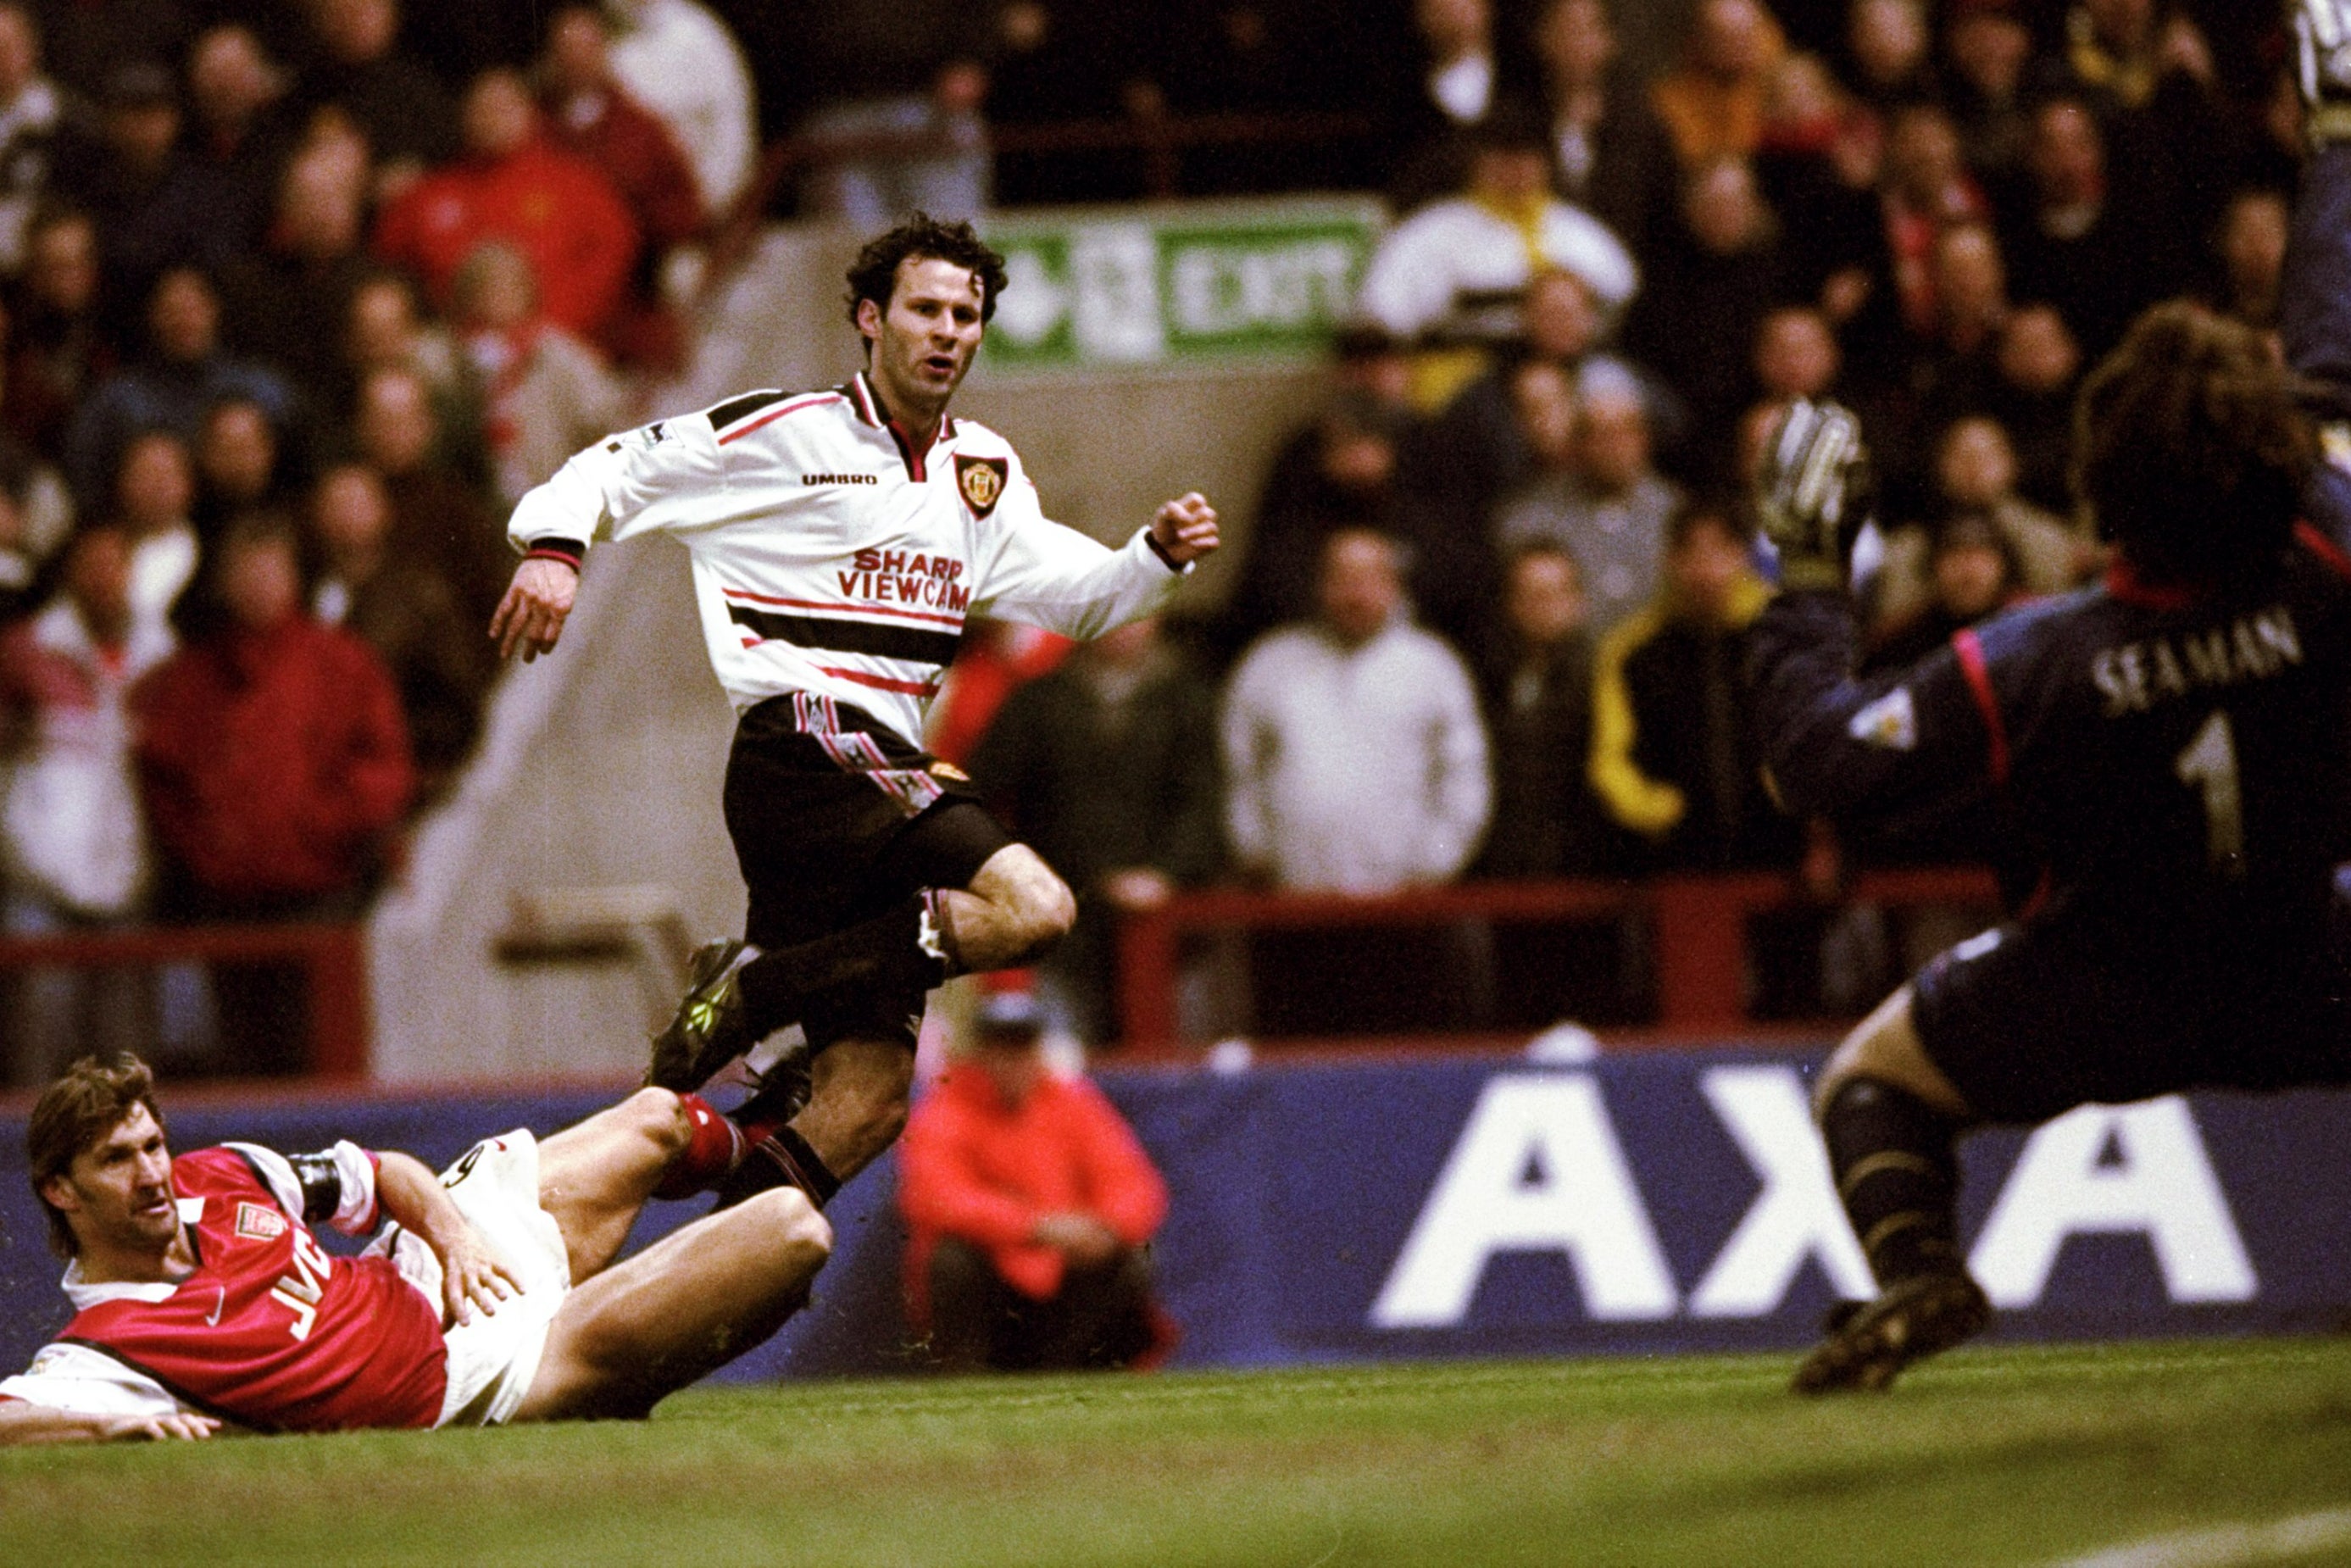 Ryan Giggs’s wonder-goal against Arsenal is an iconic FA Cup replay moment